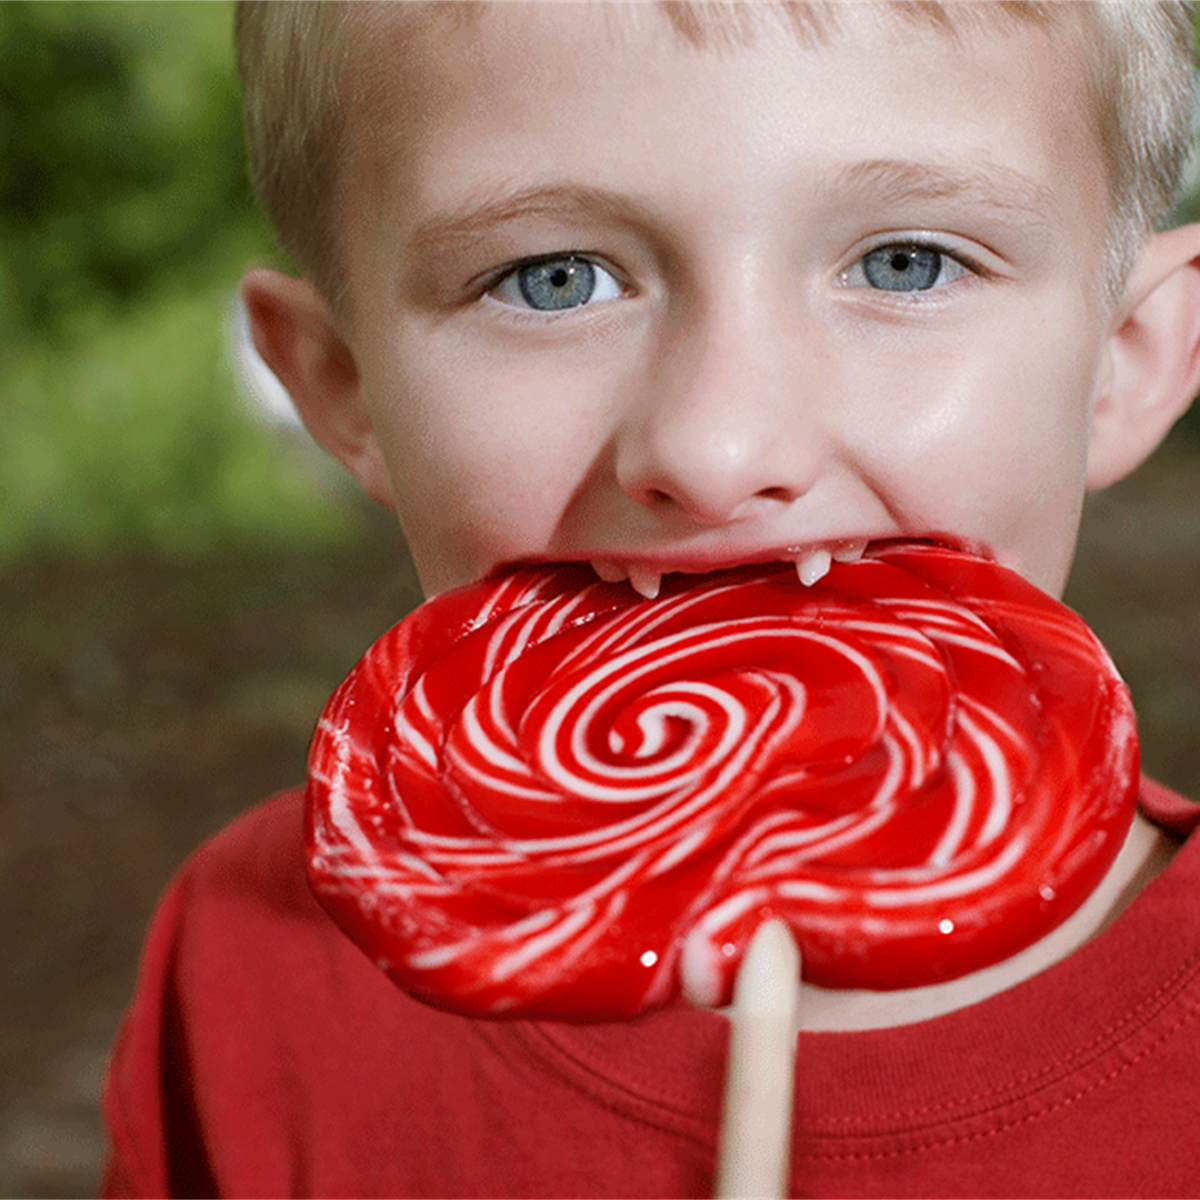 How much candy do Americans eat in a whole year?